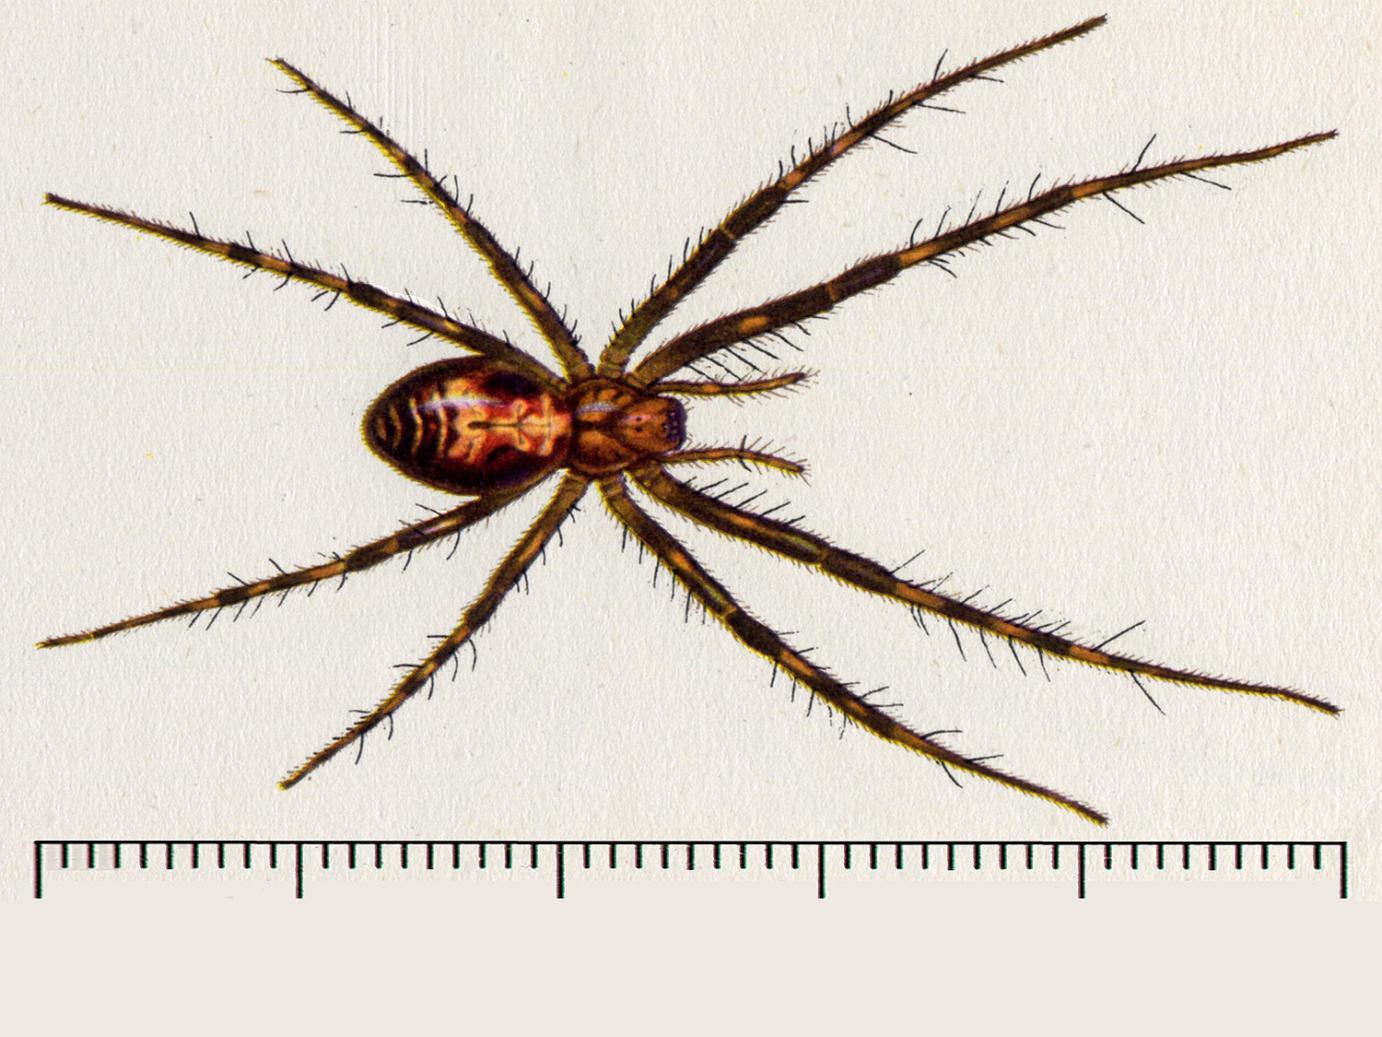 An illustration of a European Cave Spider with long legs